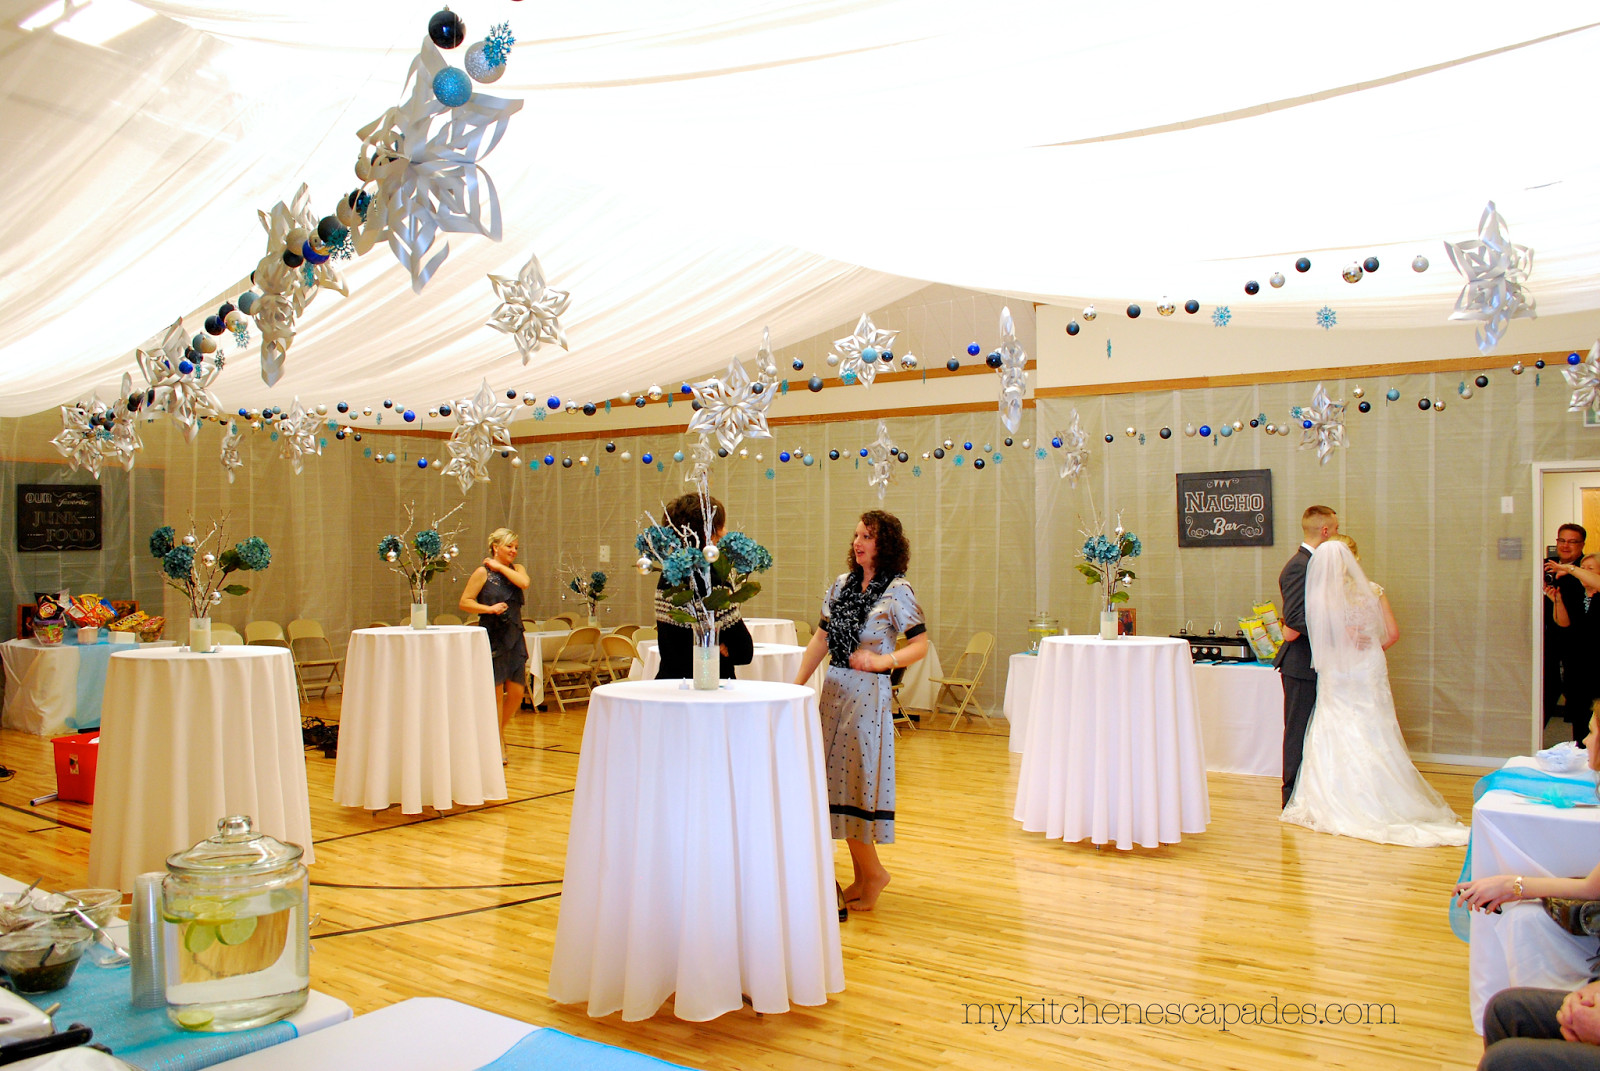 DIY Wedding Ceiling Drapery
 Wedding Ceiling Draping Tutorial How to Measure and Hang